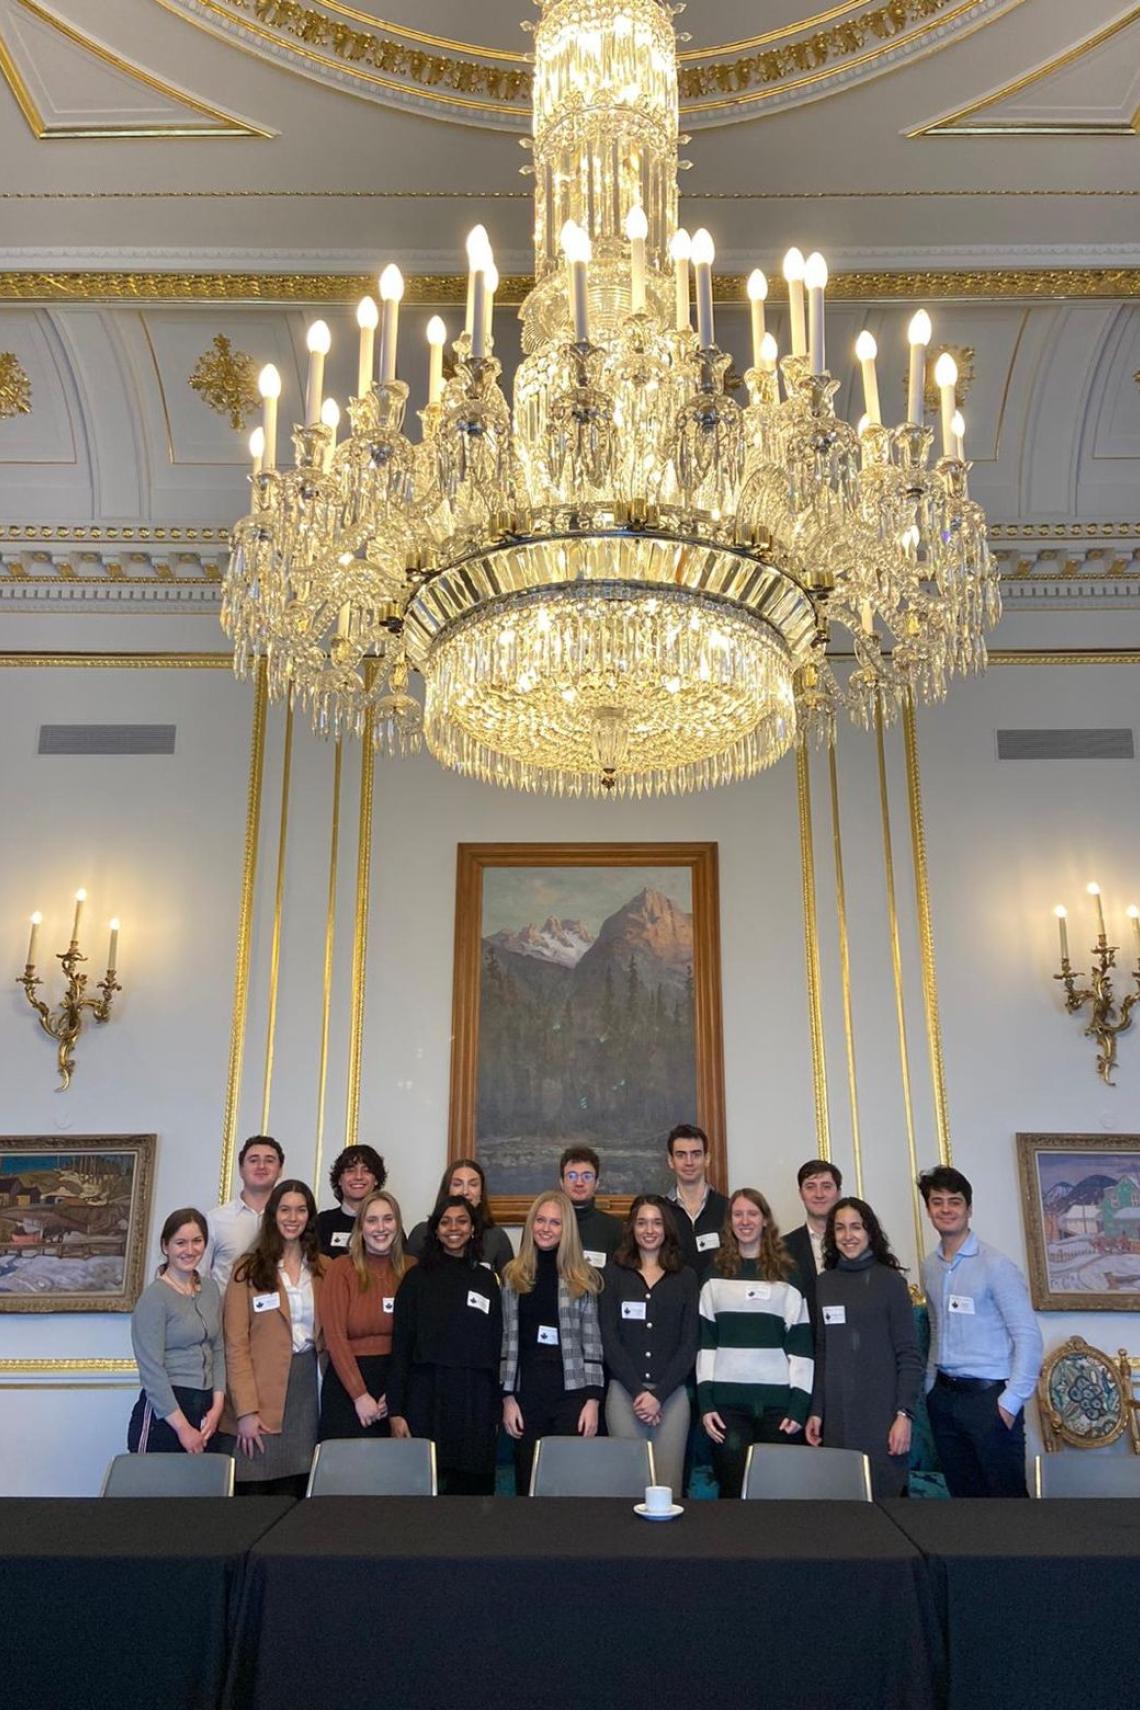 A group of students beneath a large ornate chandelier